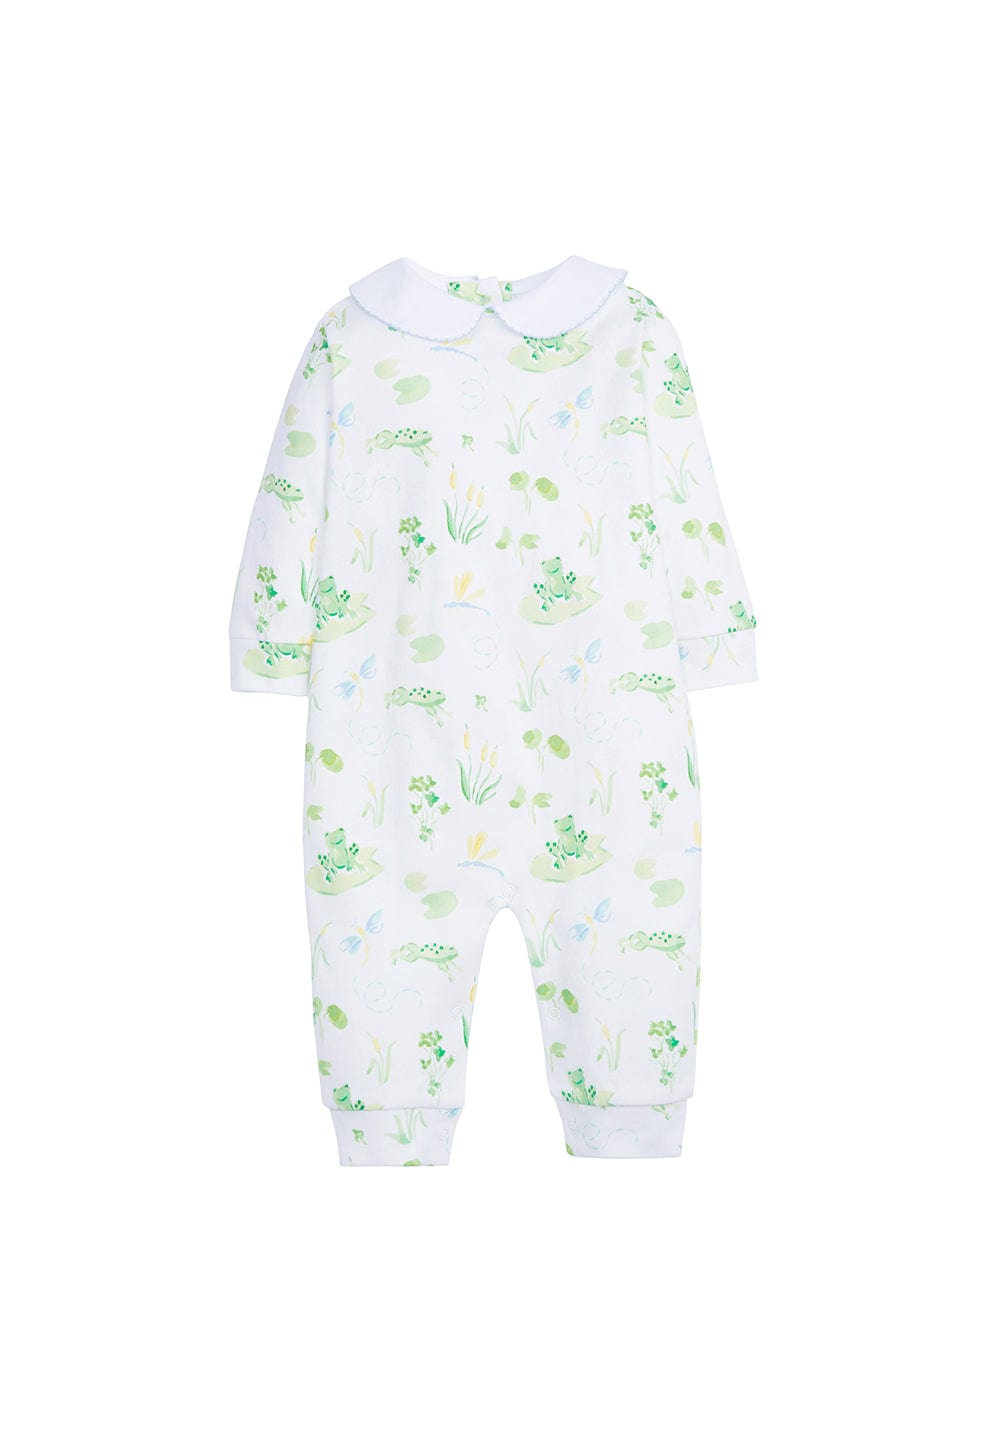 classic childrens clothing boys printed playsuit with peter pan collar and frog and lily pad pattern